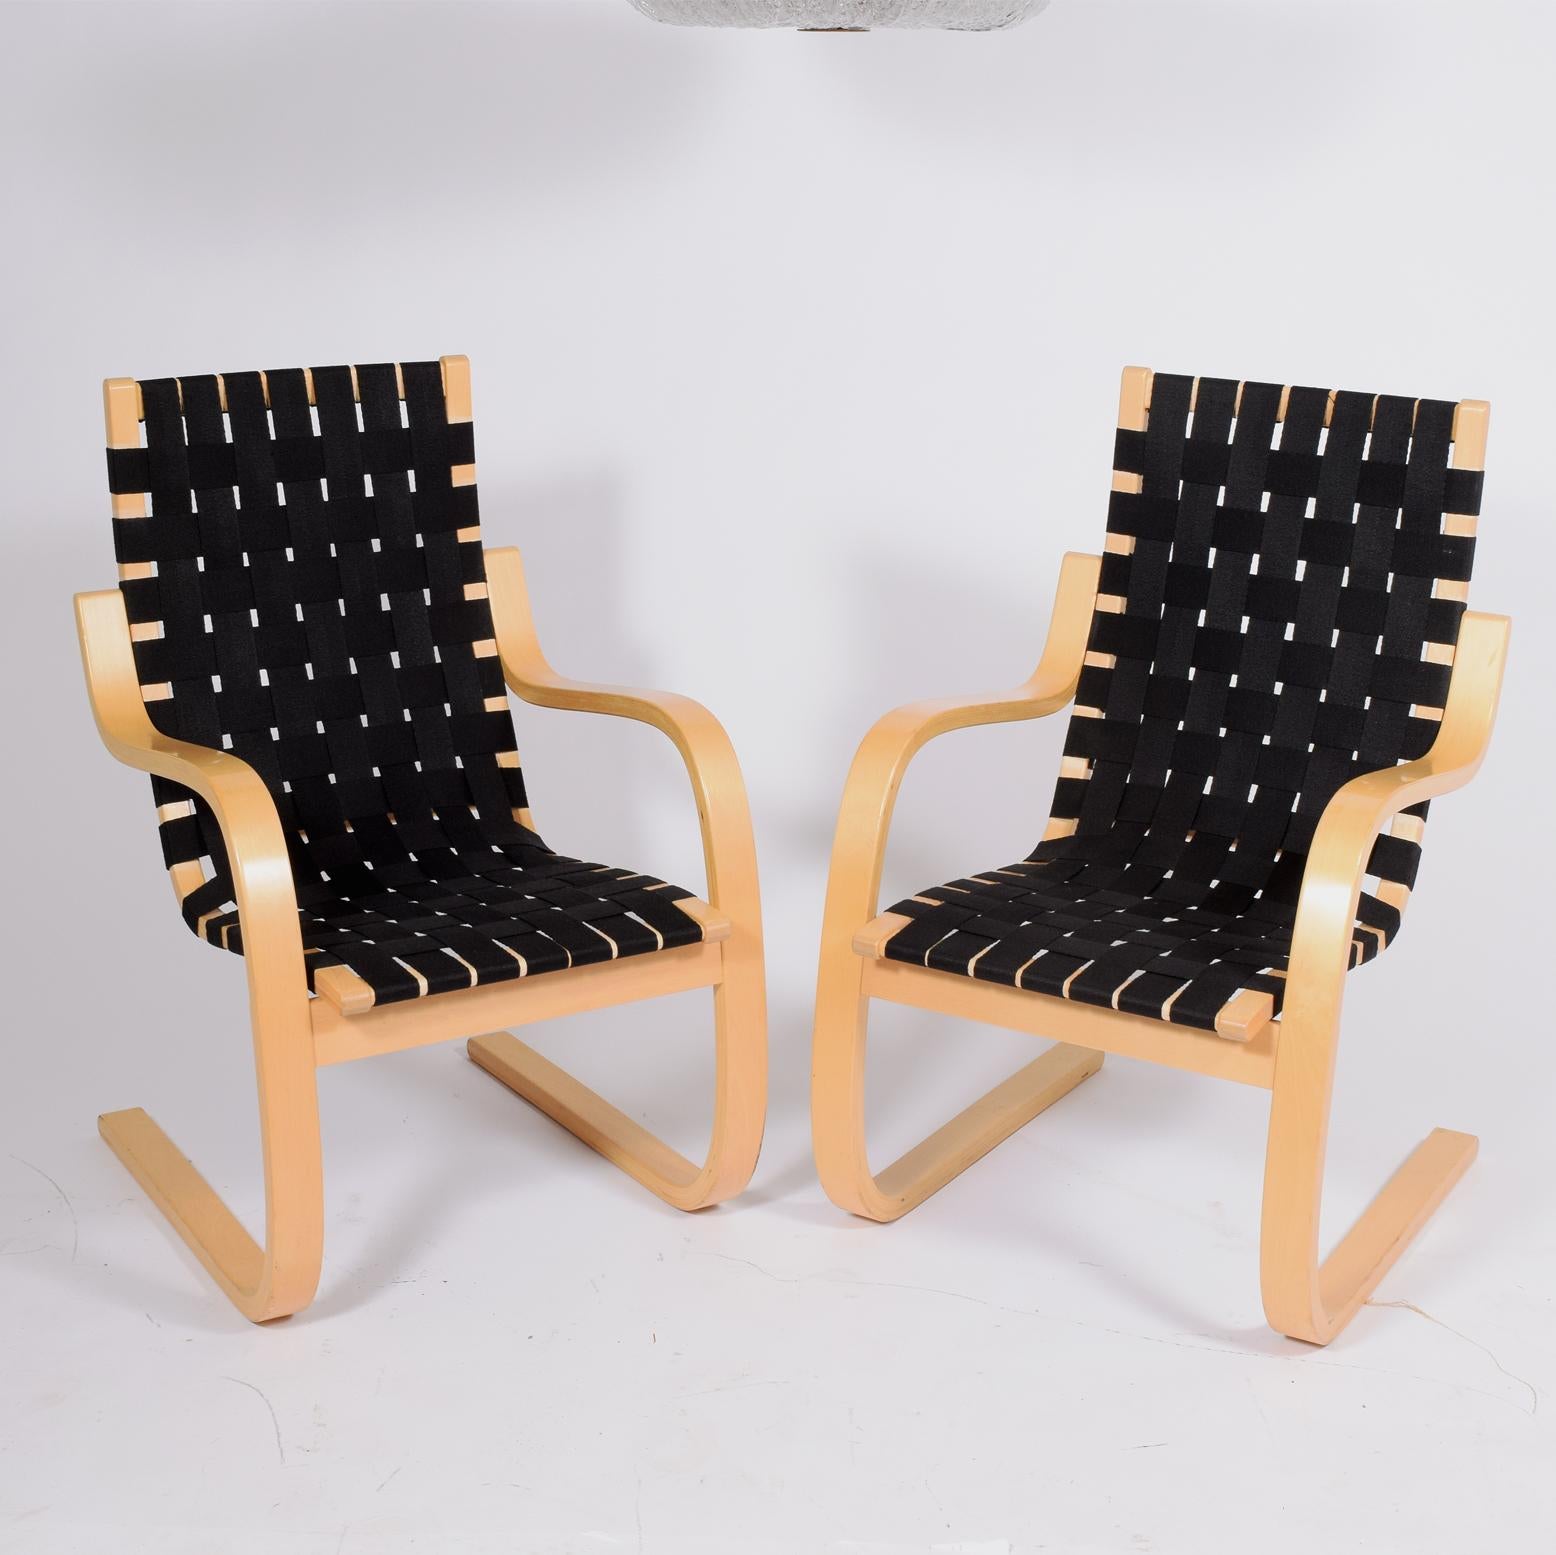 Alvar Aalto model 406 lounge chairs. Bent natural wood frames with woven canvas strapped seating. In original condition with some fading paper label